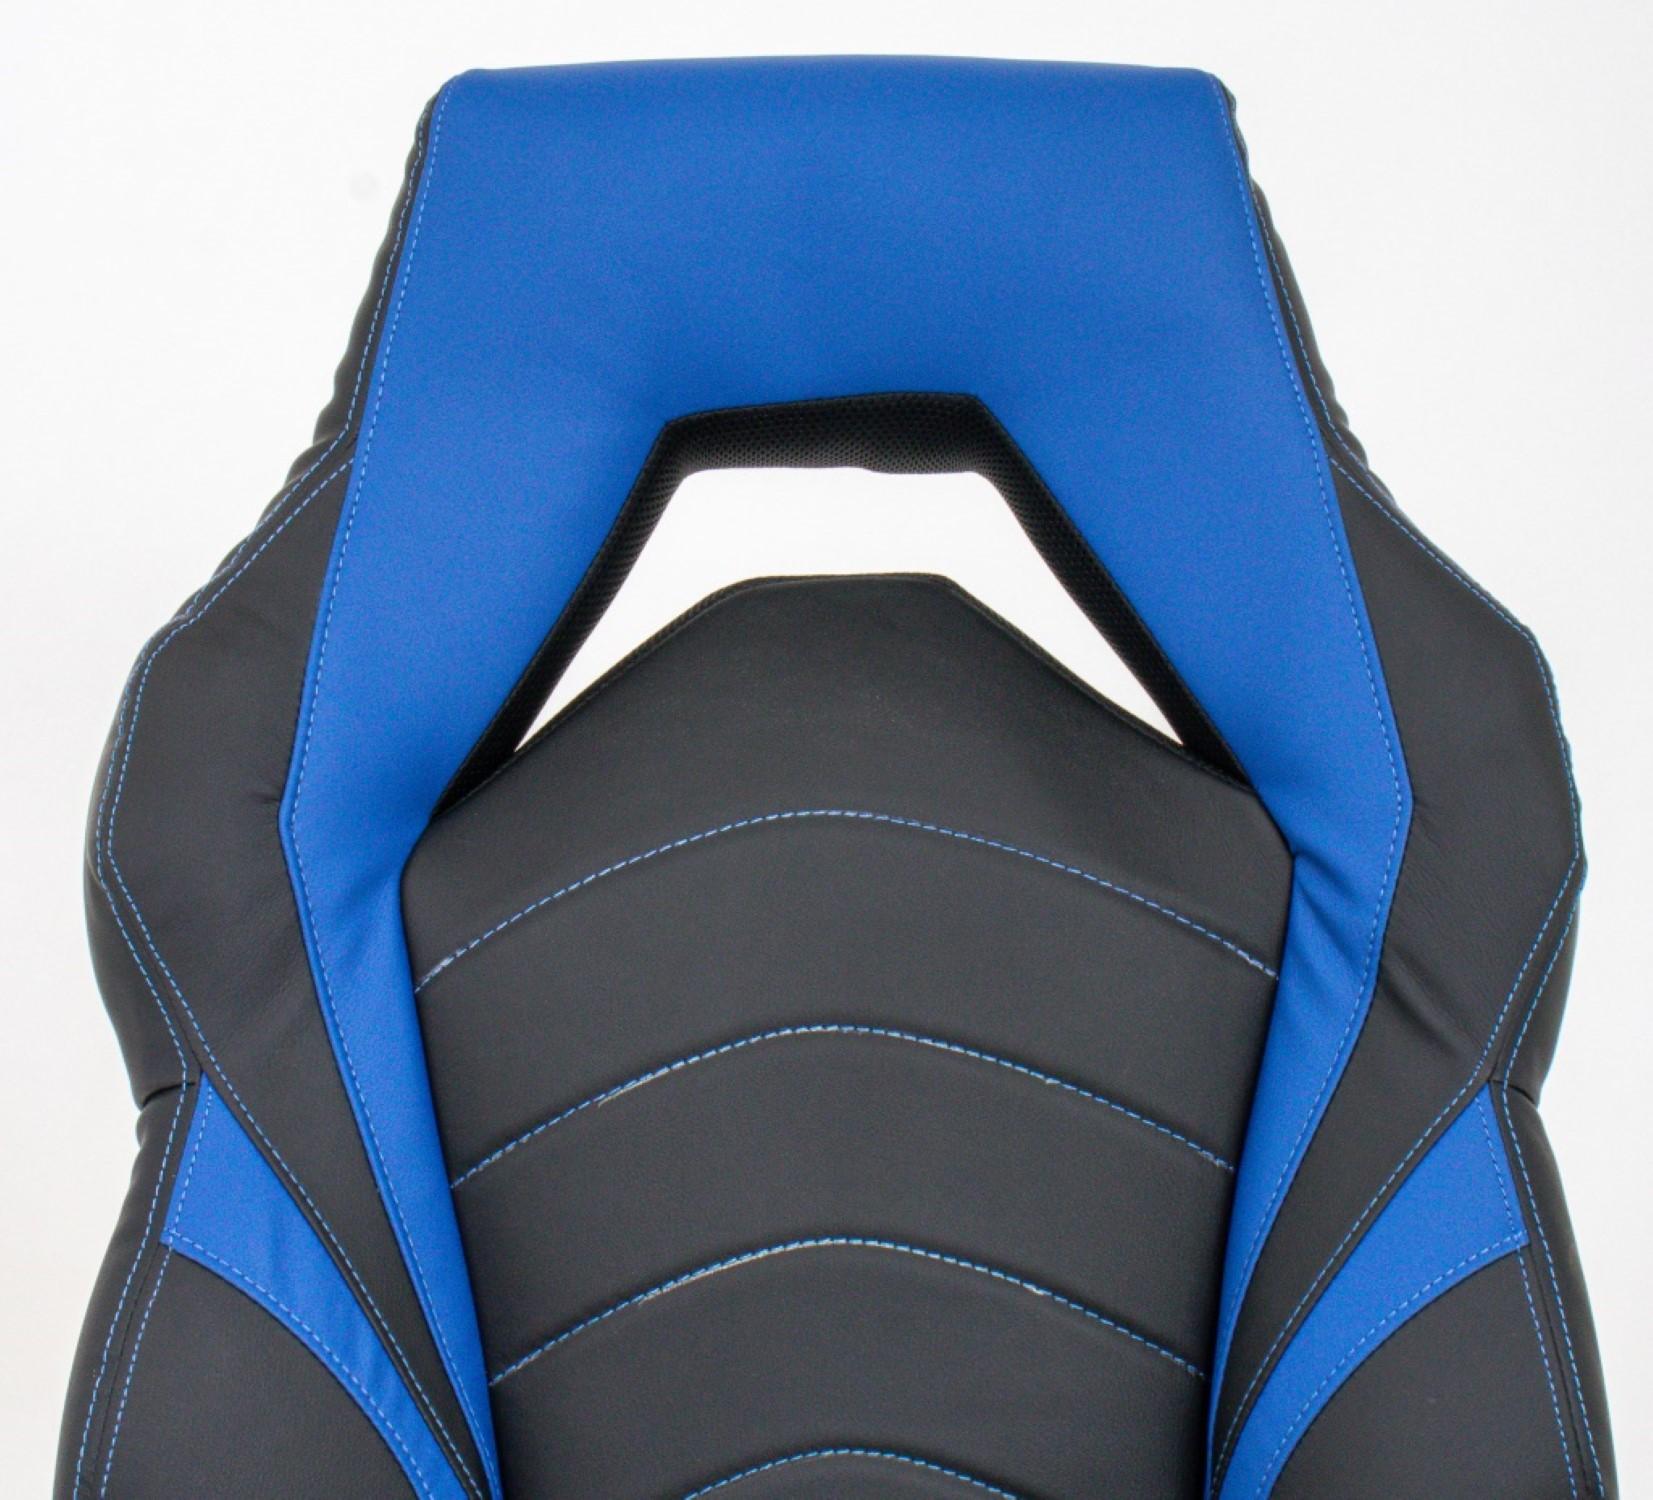 Black and blue extra-wide gaming chair, with adjustable armrests and seat height.

47 inches in height, 21 inches in width, and 20 inches in depth; seat height is 18 inches.